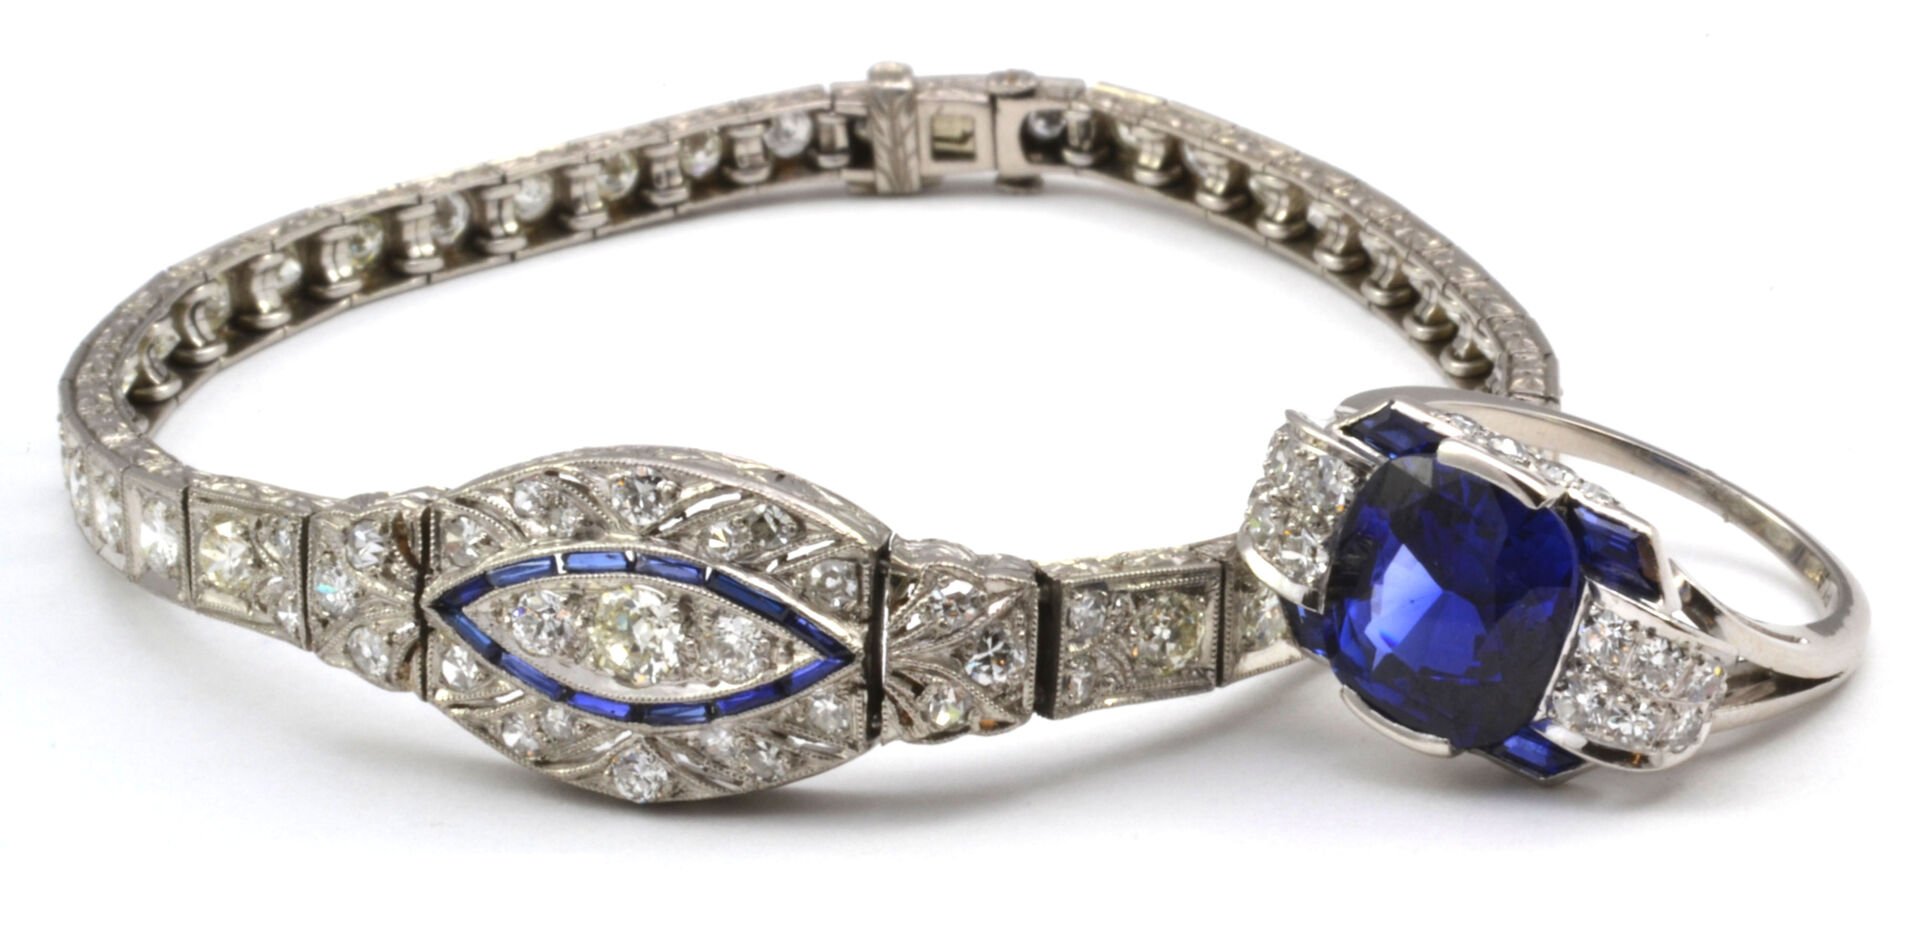 What are some characteristics of Art Deco Jewelry